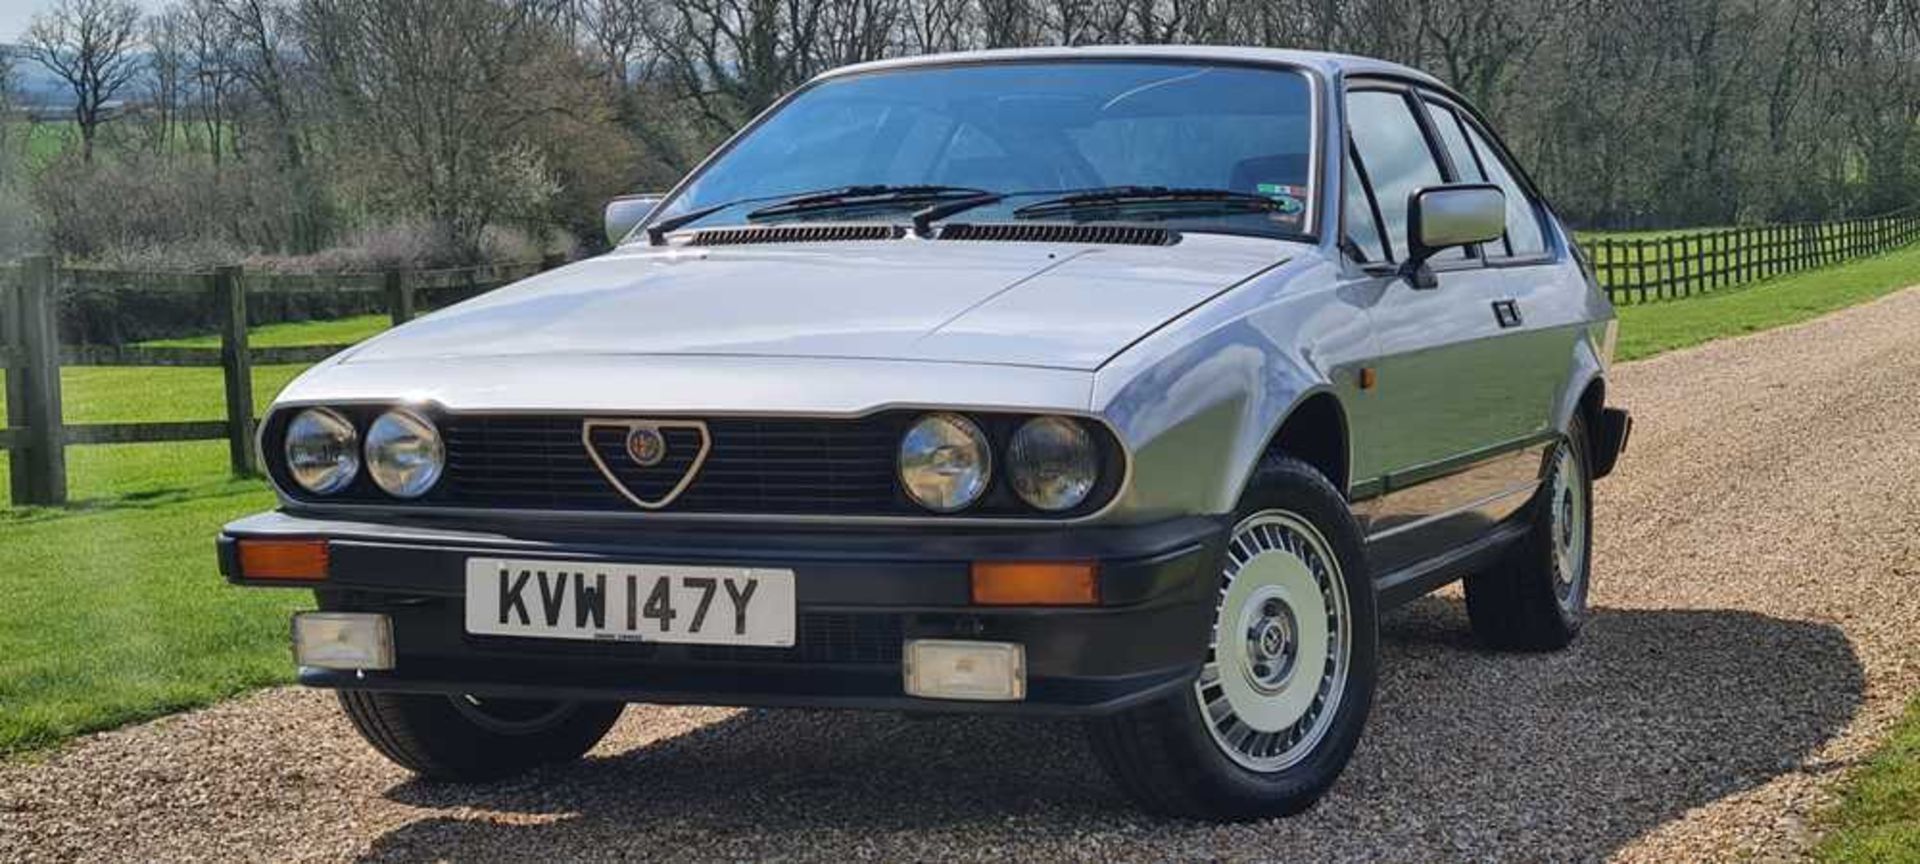 1983 Alfa Romeo GTV 2.0 litre Single family ownership and 48,000 miles from new - Image 12 of 51